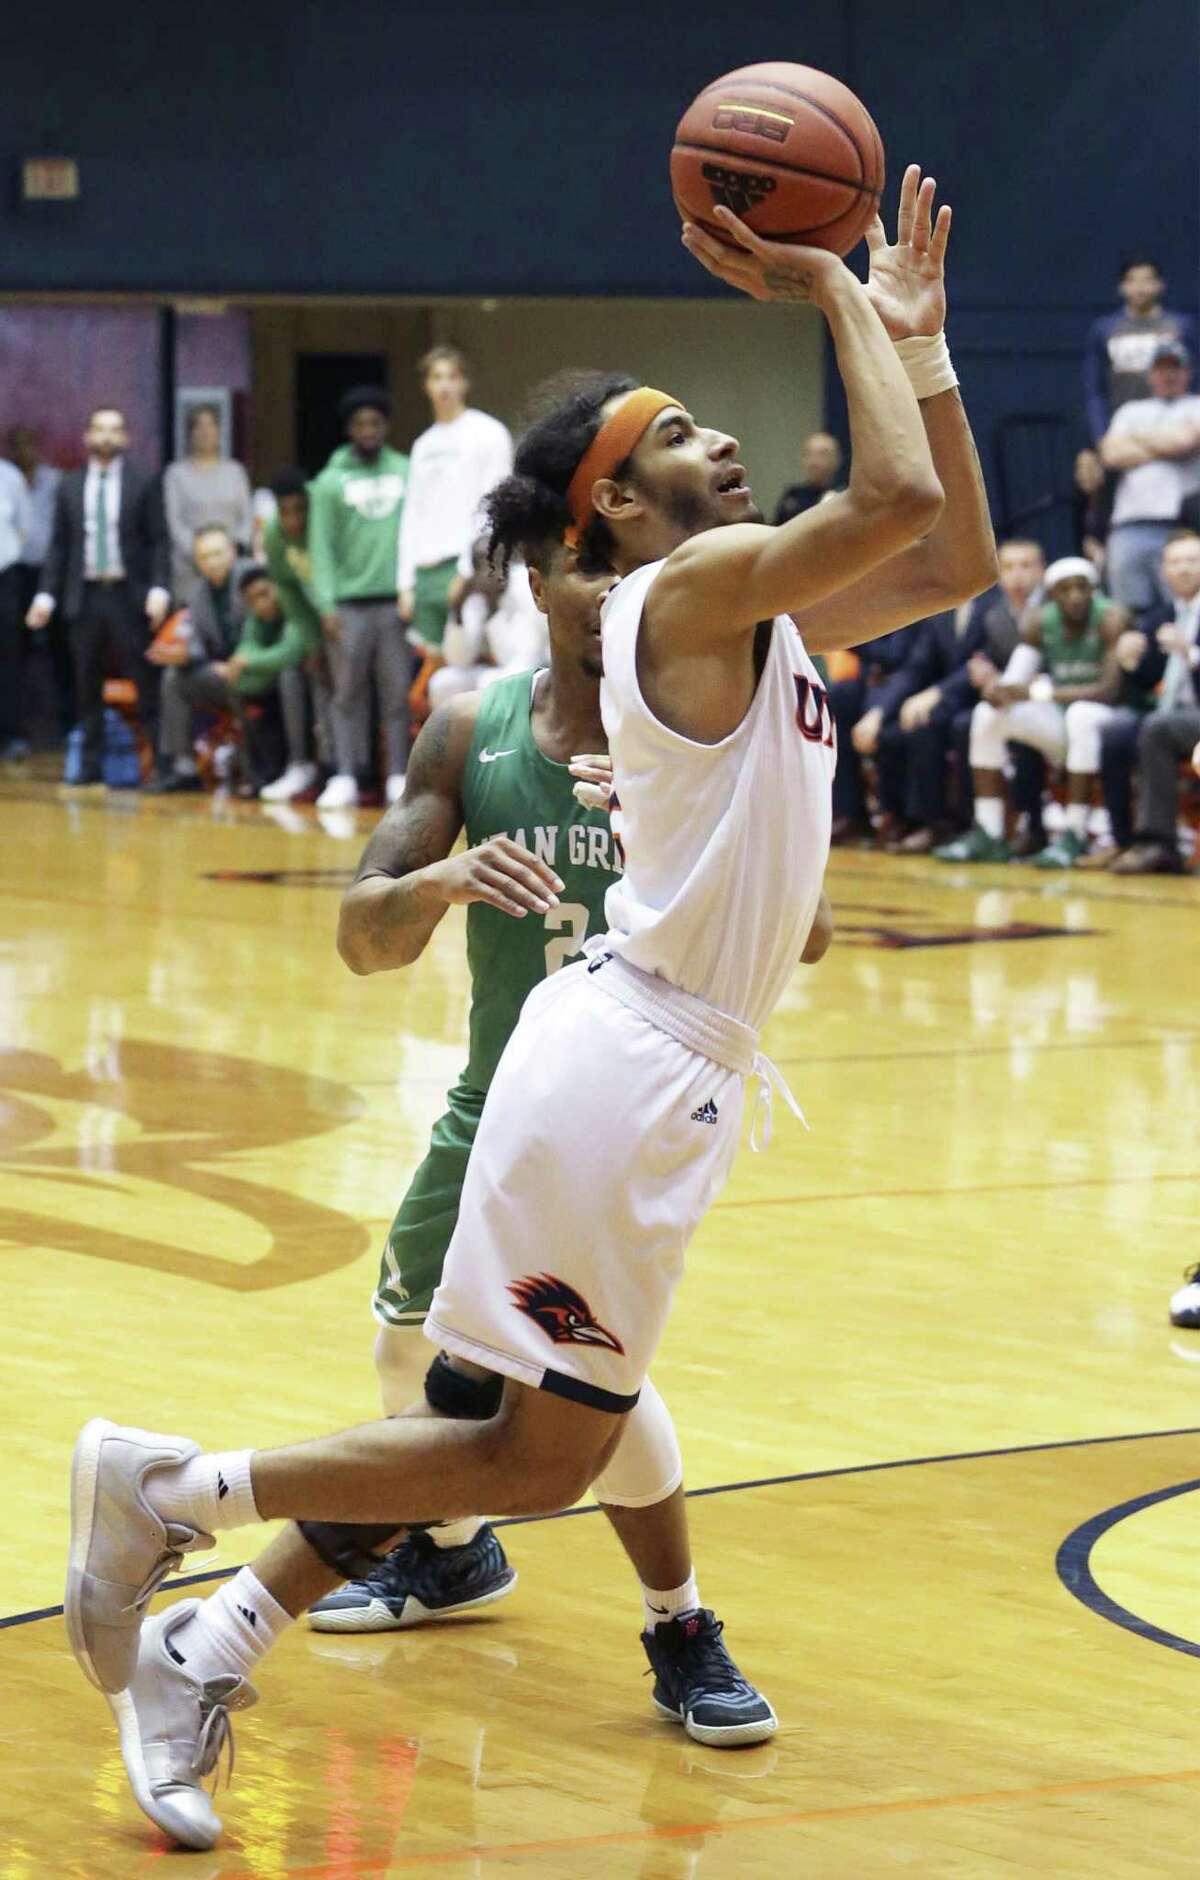 Jhivvan Jackson turns away from Jorden Duffy and hits the game winning shot as UTSA beats North Texas 76-74 at the Convocation Center on January 12, 2019.